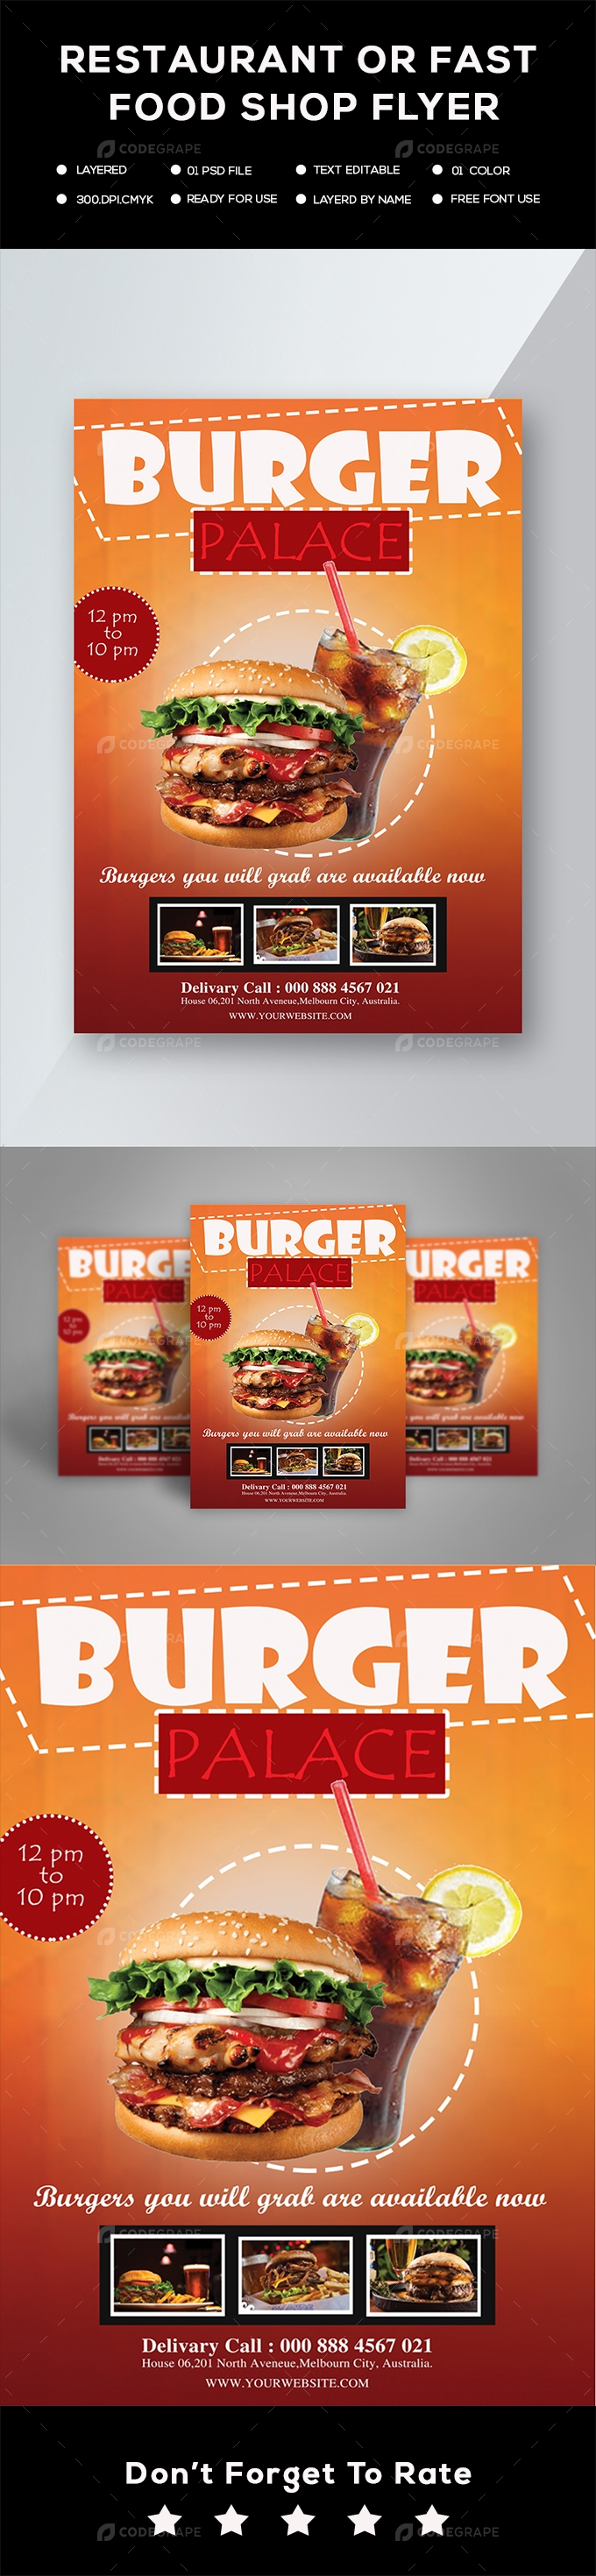 Classic And Trendy Restaurant Or Fast Food Shop Flyer